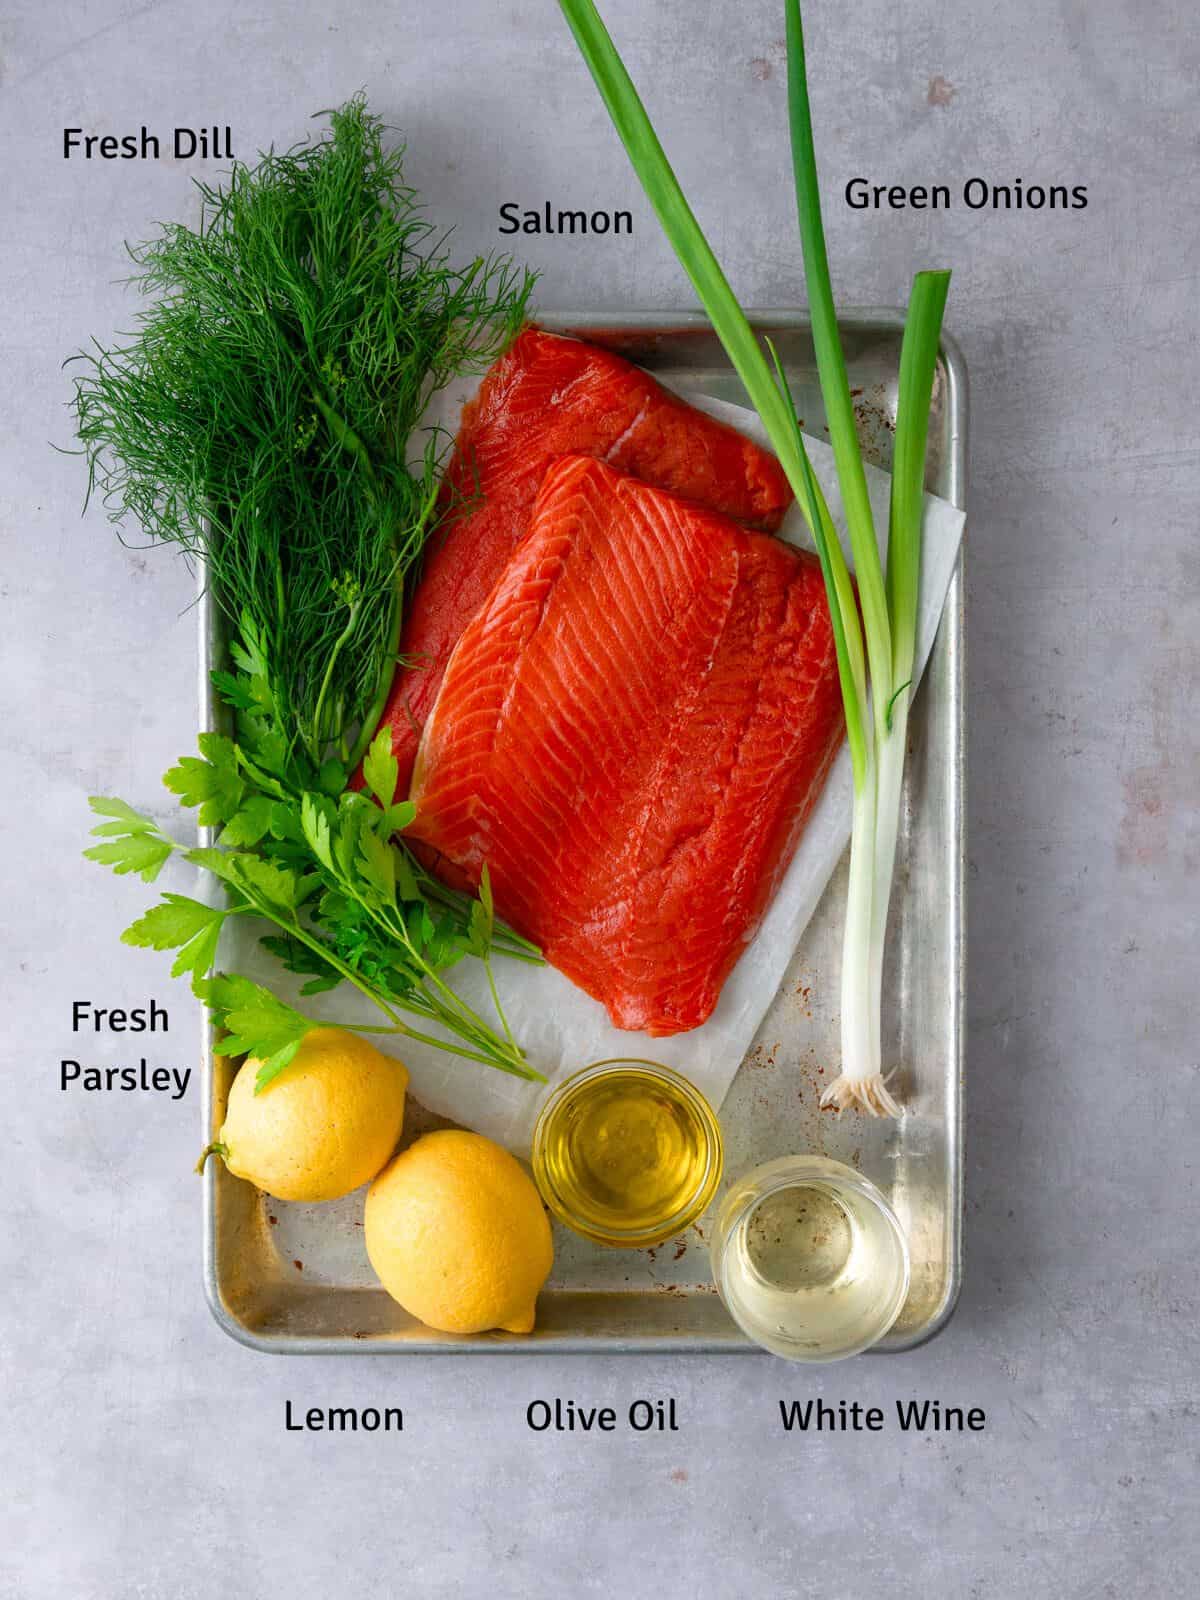 Ingredients for herb salmon with fresh herbs, lemon, white wine and olive oil.